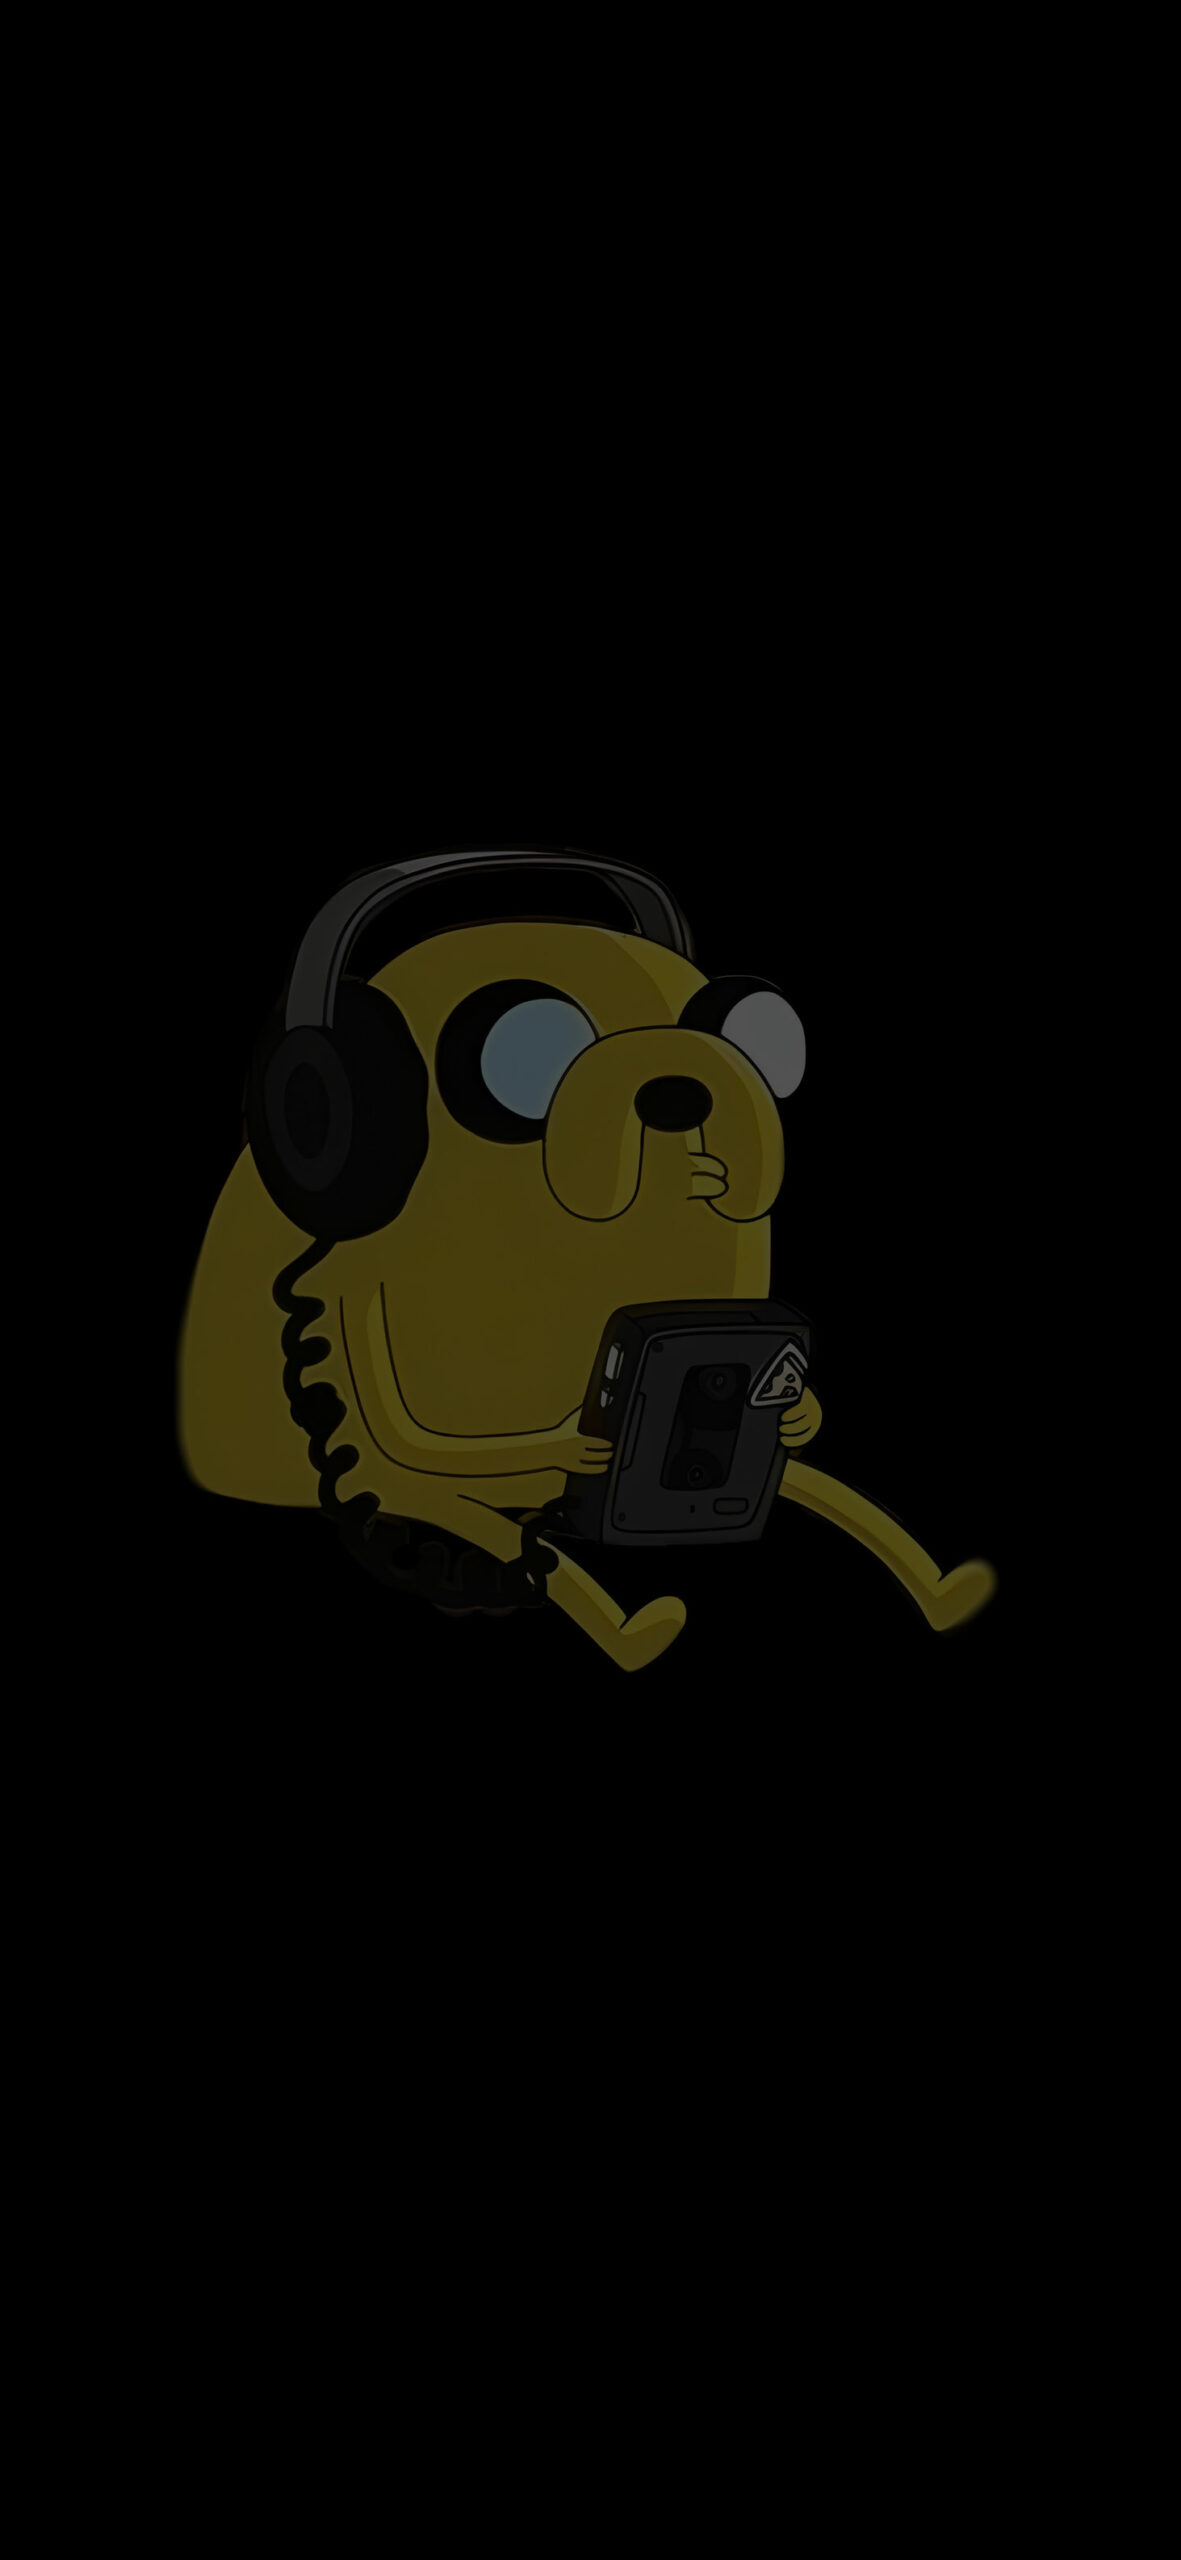 Adventure time jake with cassette player black wallpaper Epic